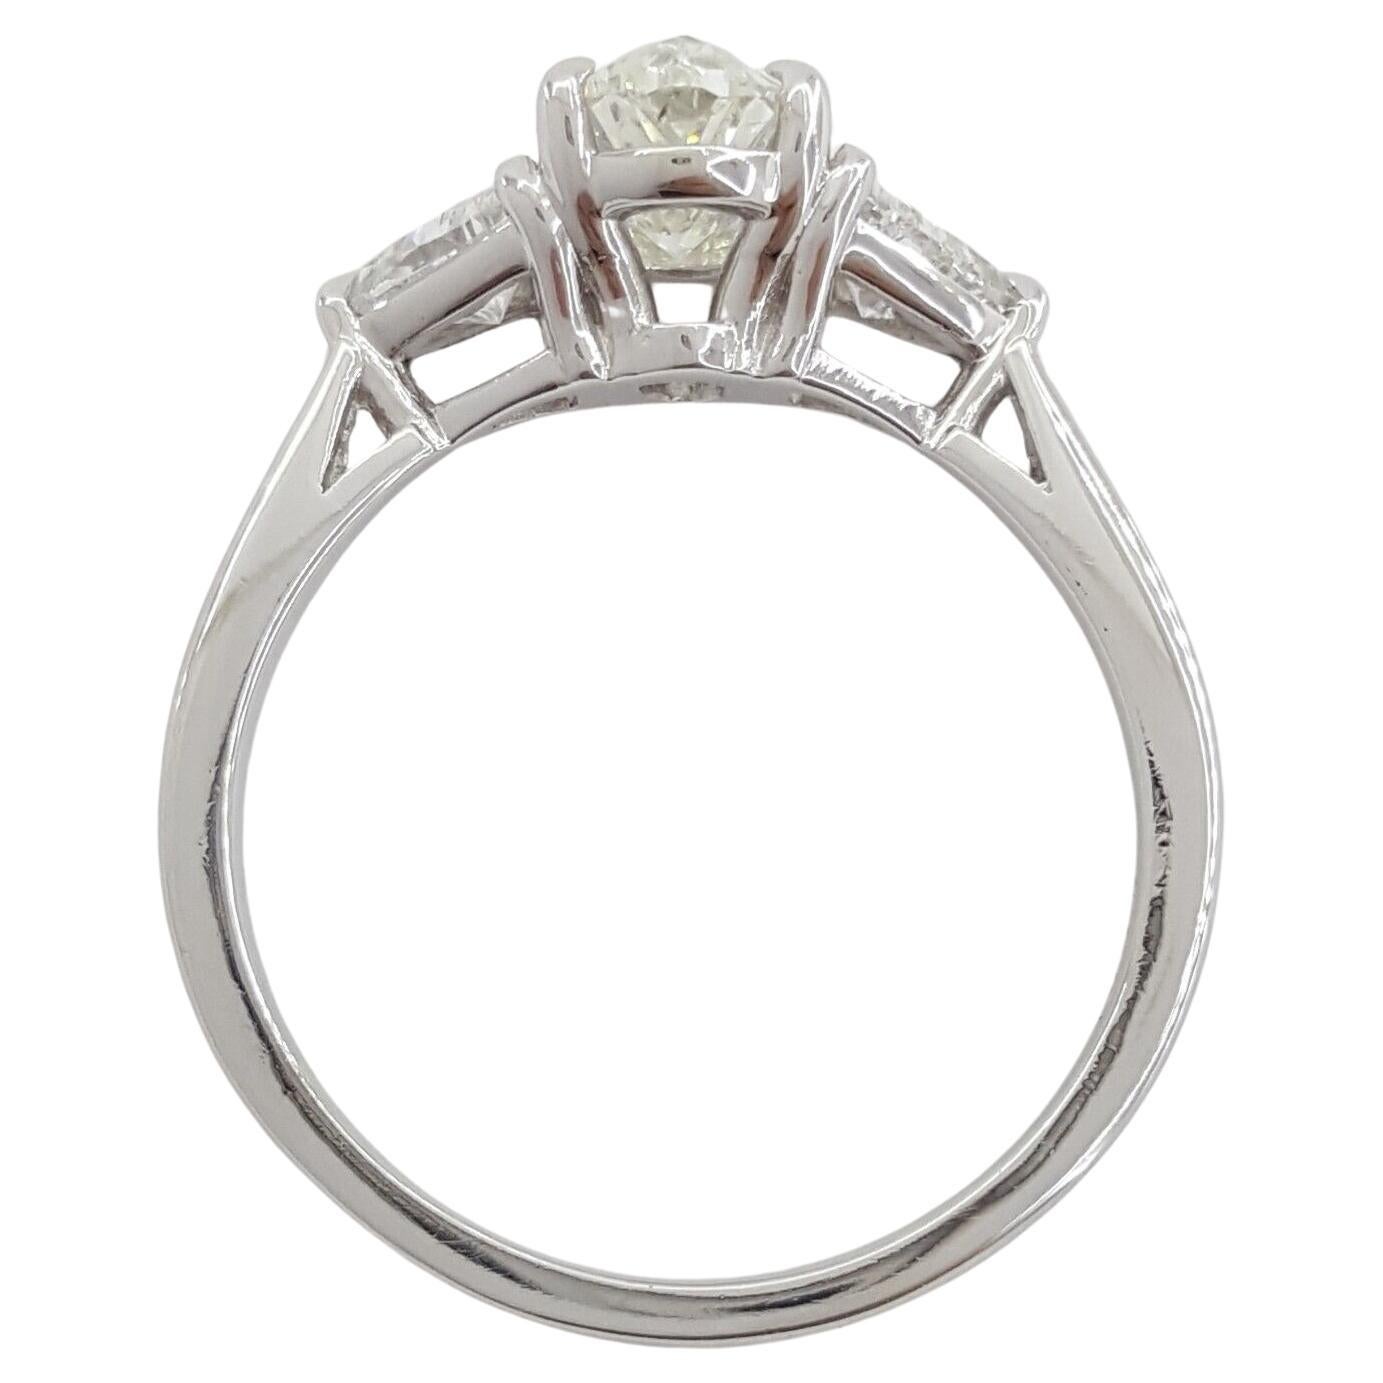 Platinum Three-Stone Oval Brilliant Cut Diamond Engagement Ring with a total weight of 1.91 carats. Weighing 5 grams and sized at 7.25, this elegant ring features a center stone of 1.31 carats, a Natural Oval Brilliant cut diamond with H color and